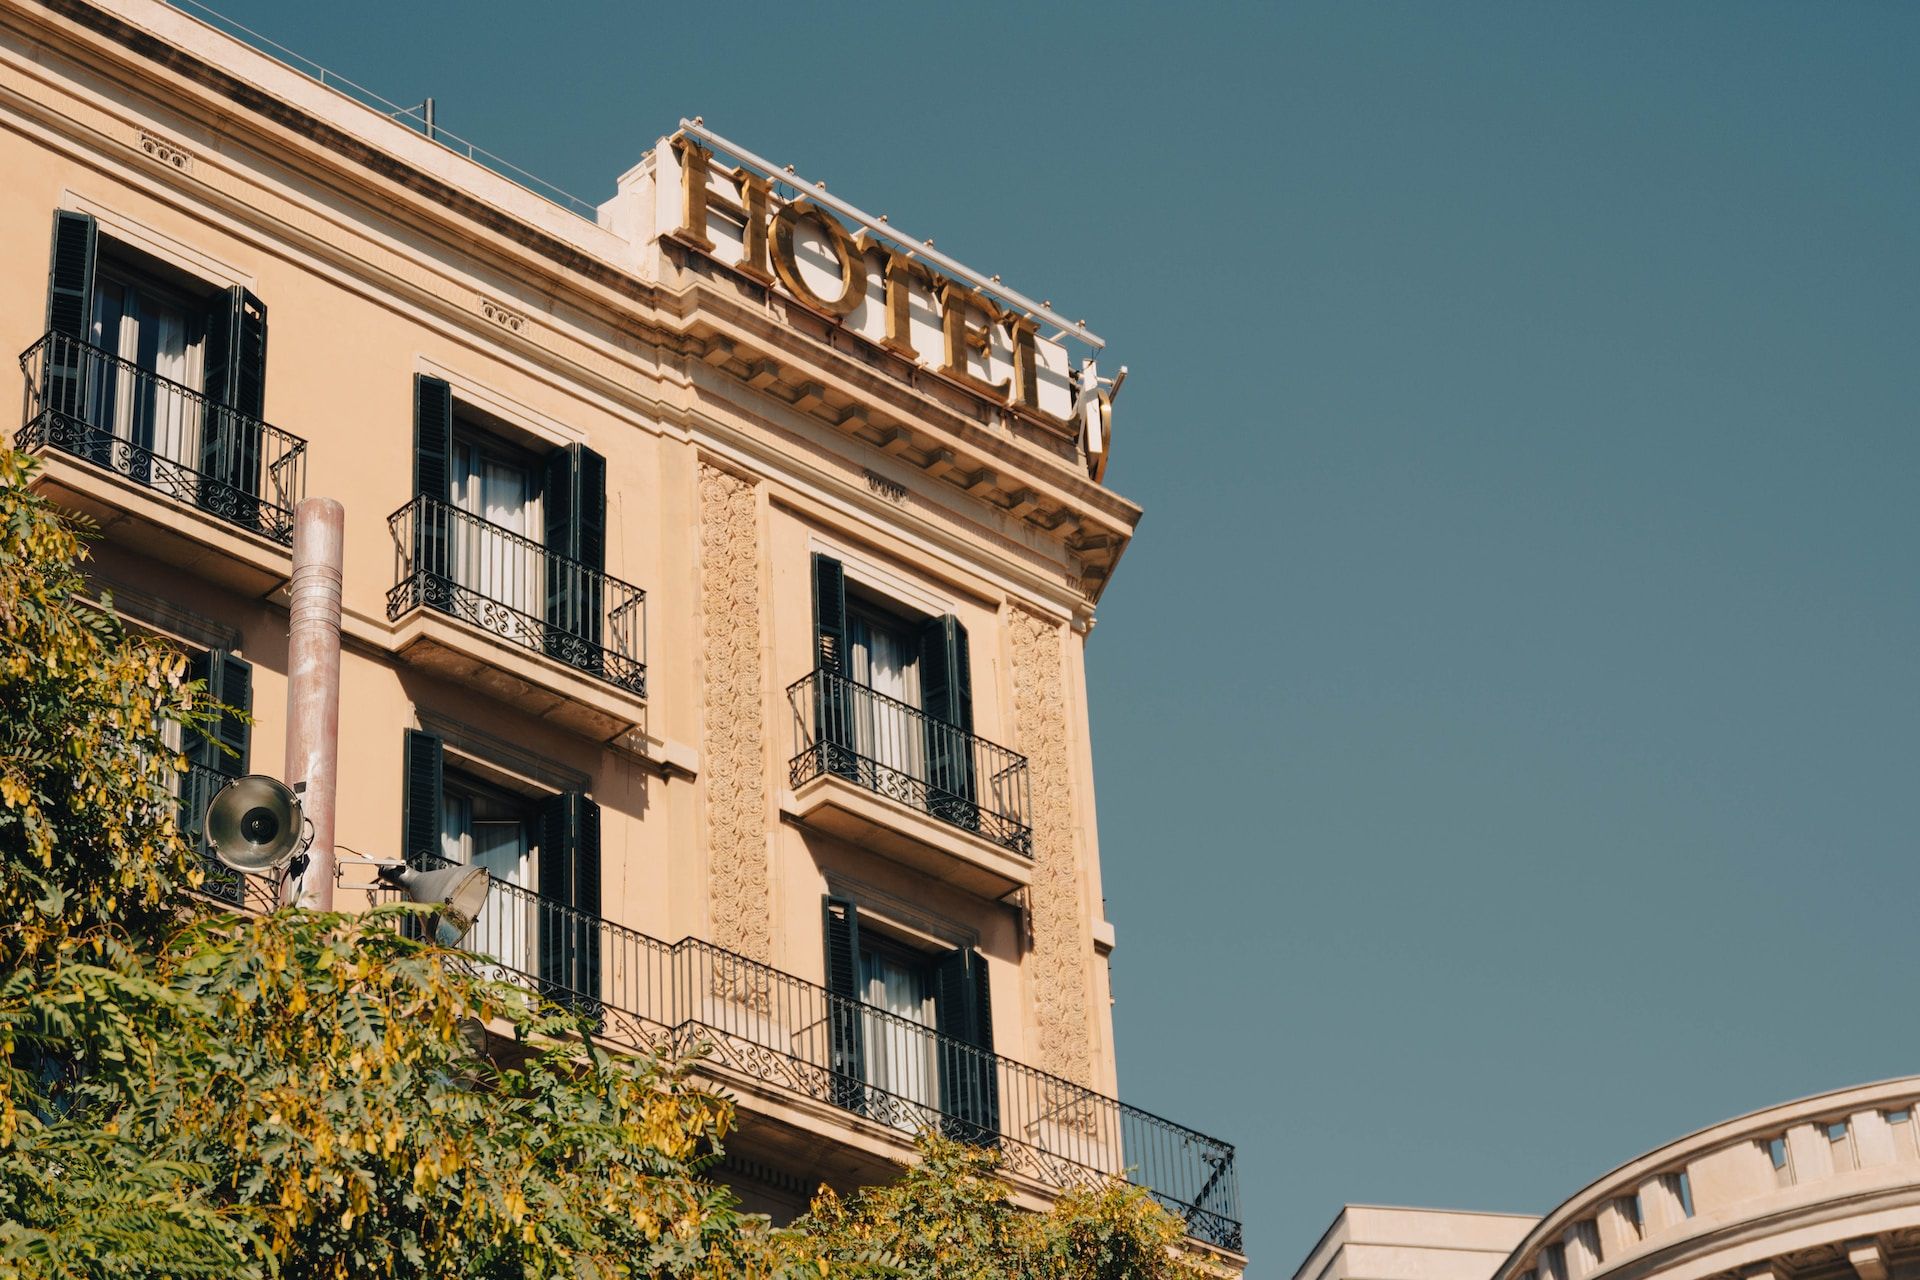 There are more than 450 hotels in Barcelona